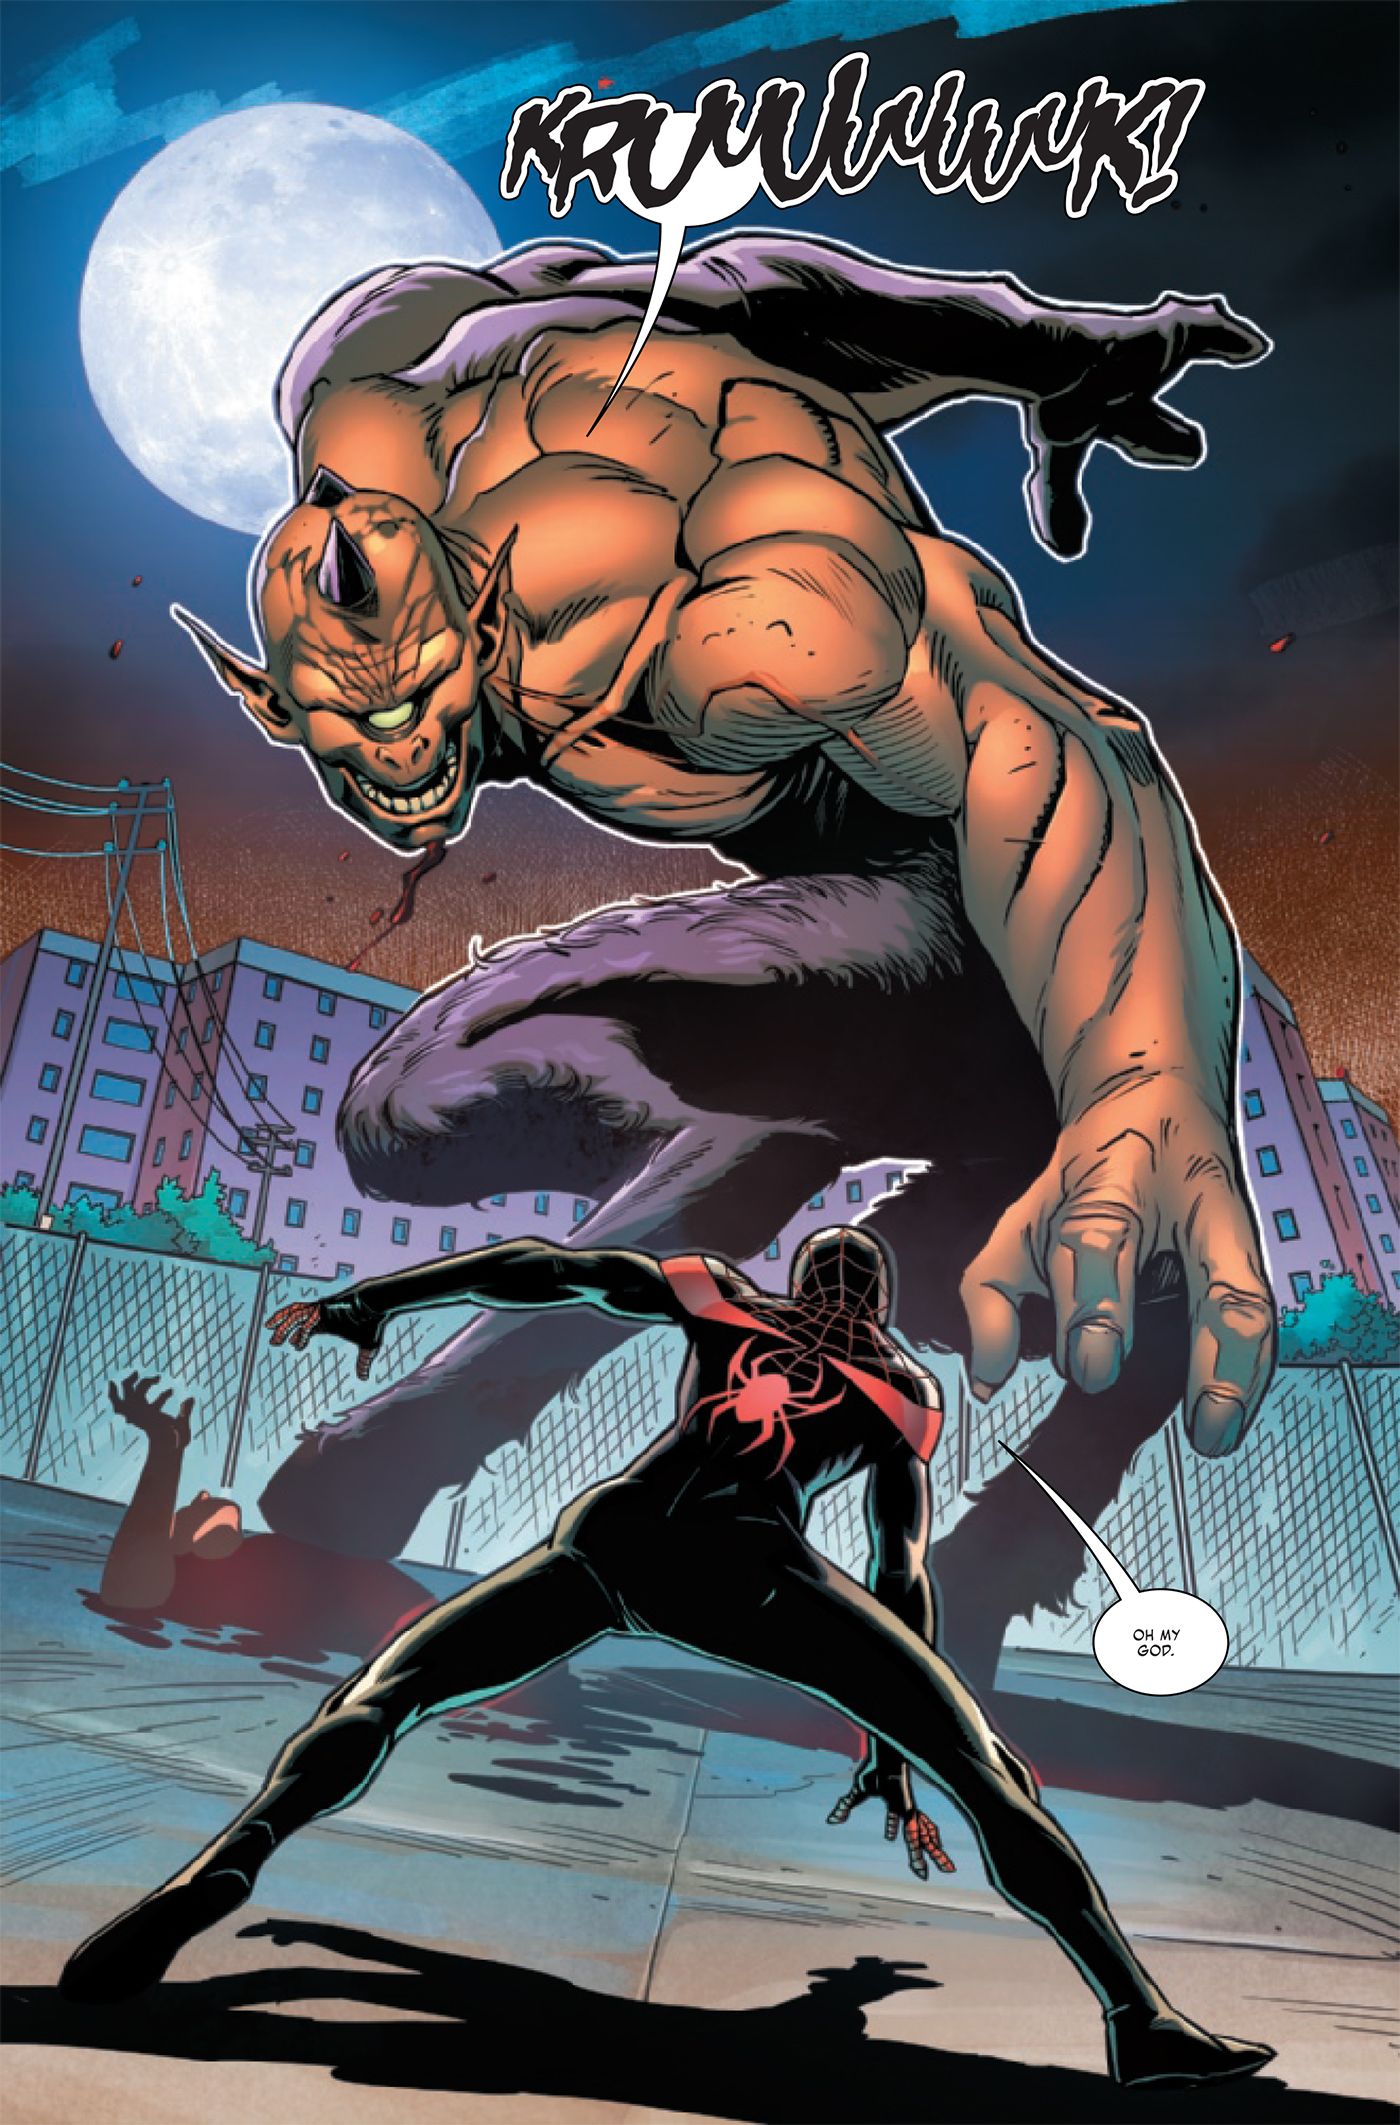 Miles comes face to face with a giant cyclops.